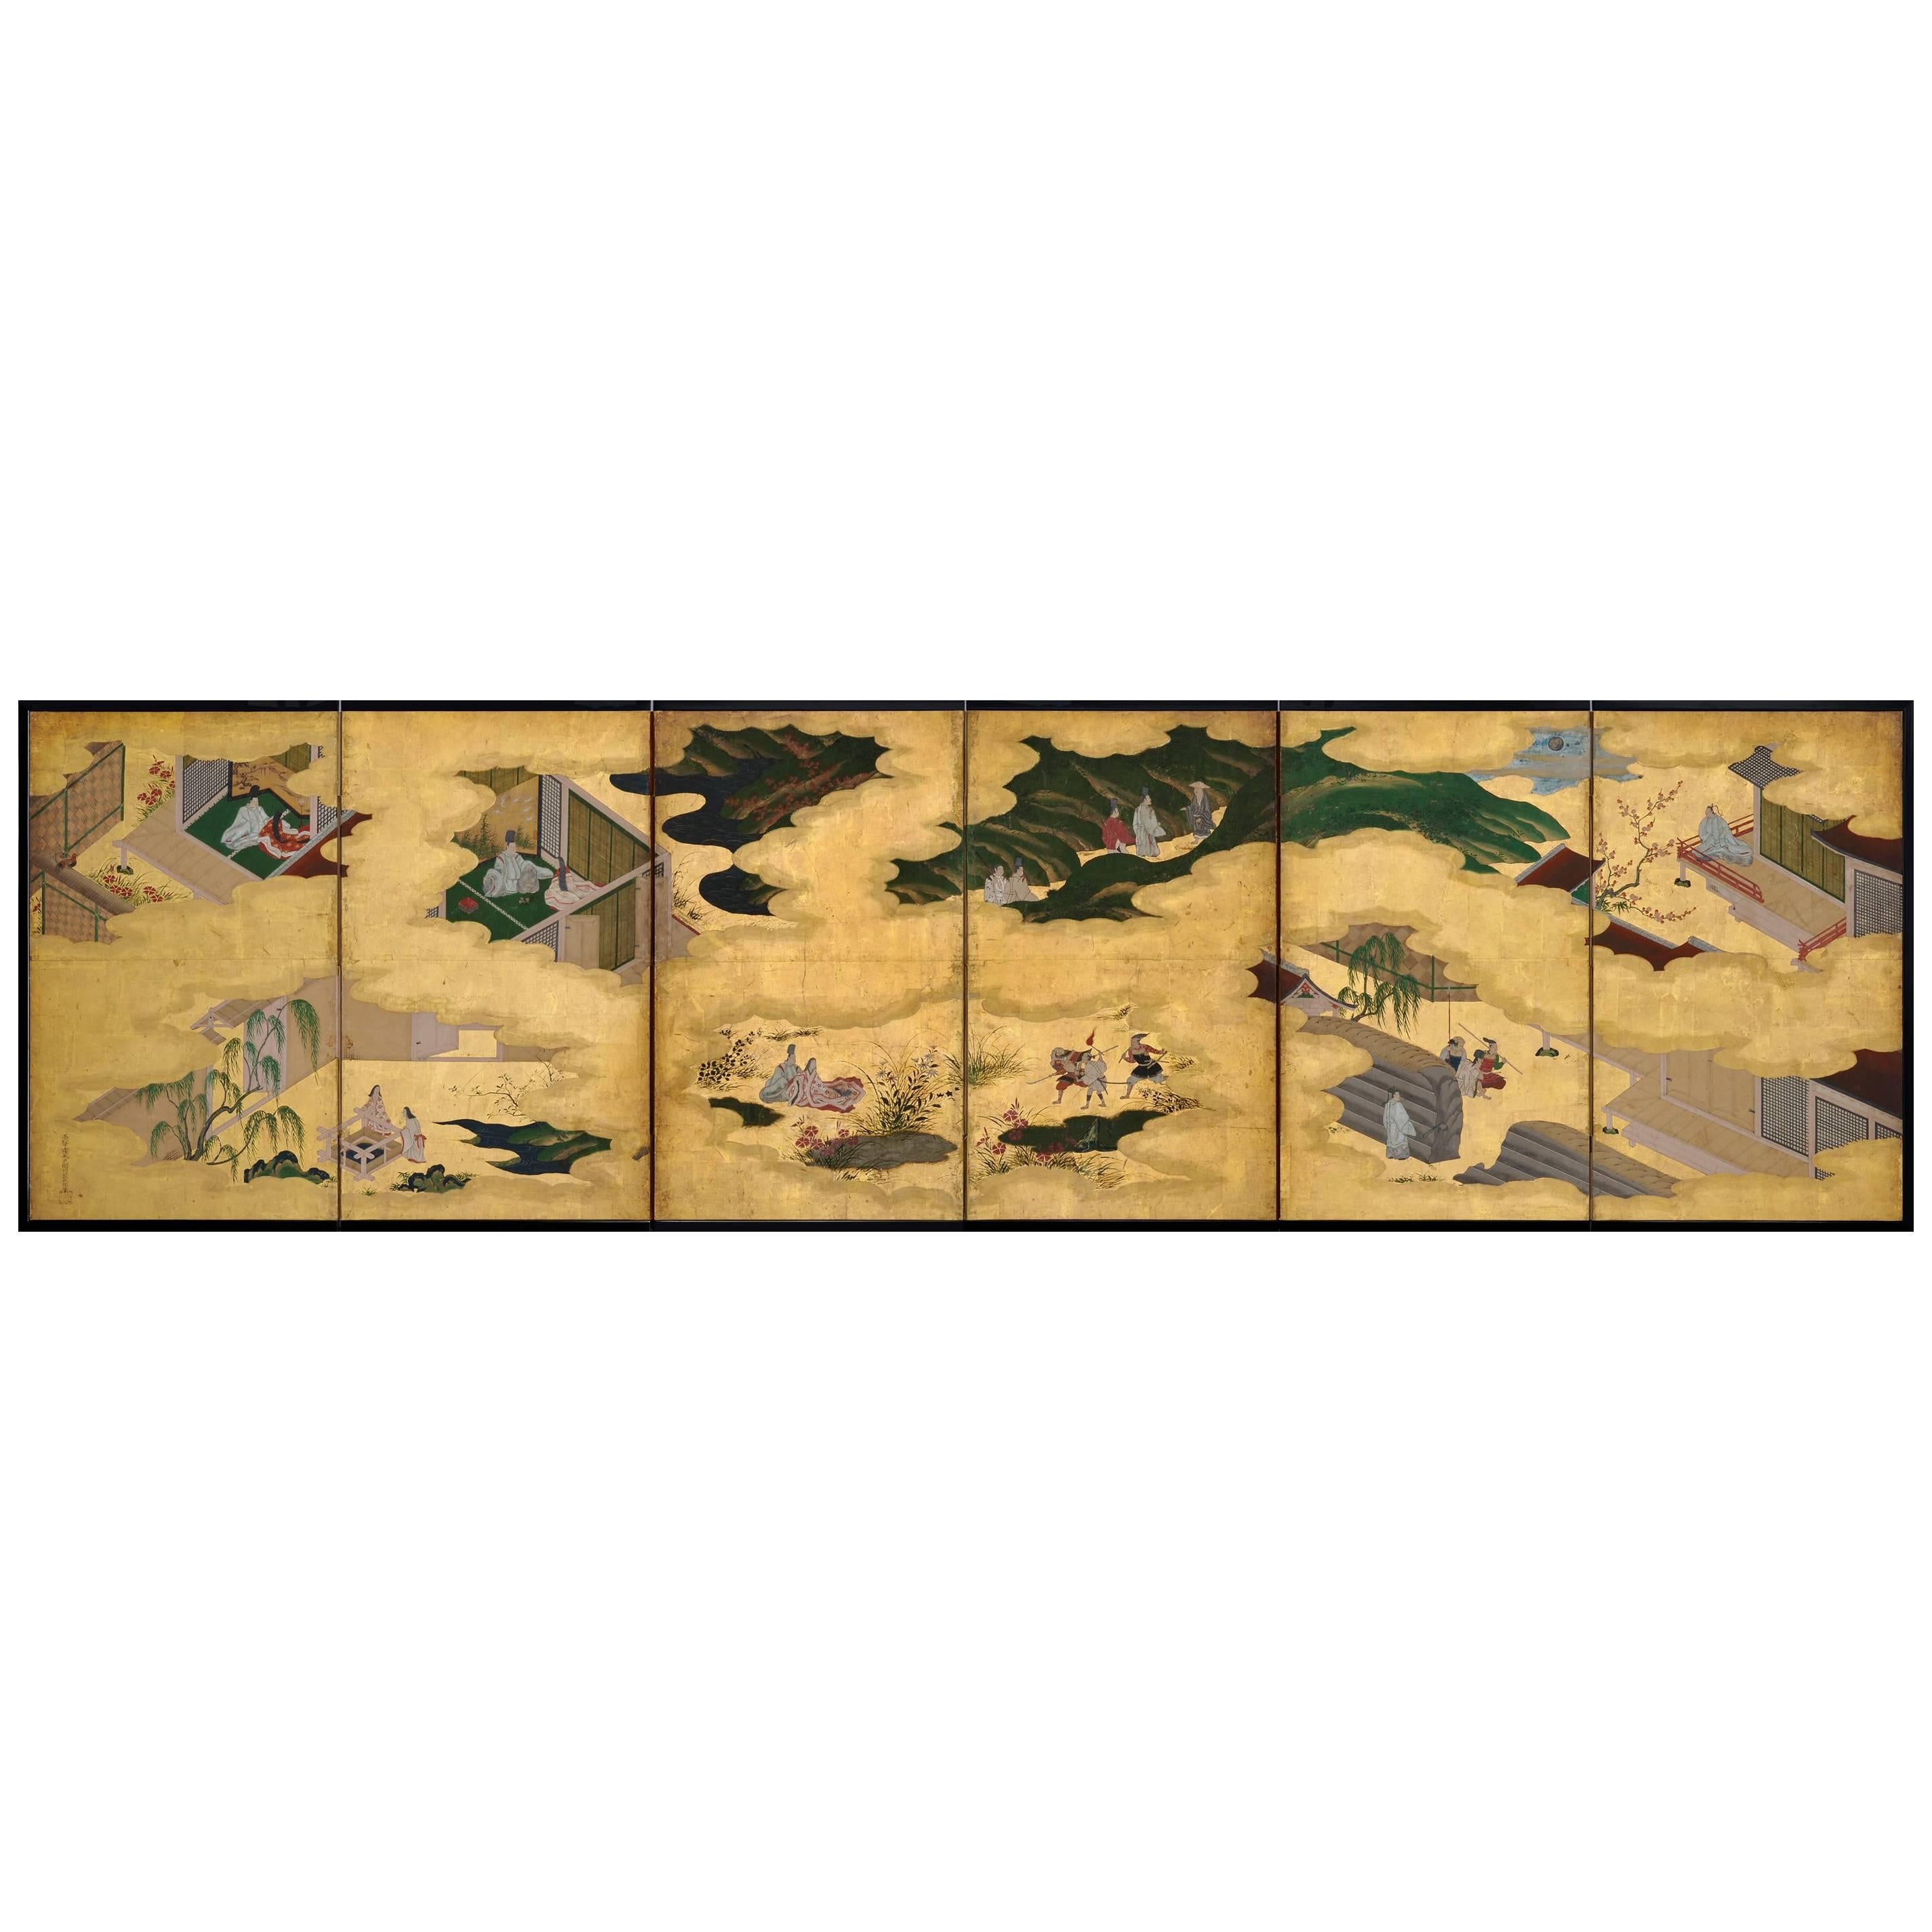 Japanese Screen Painting, Circa 1700 'Tales of Ise' by Tosa Mitsusuke